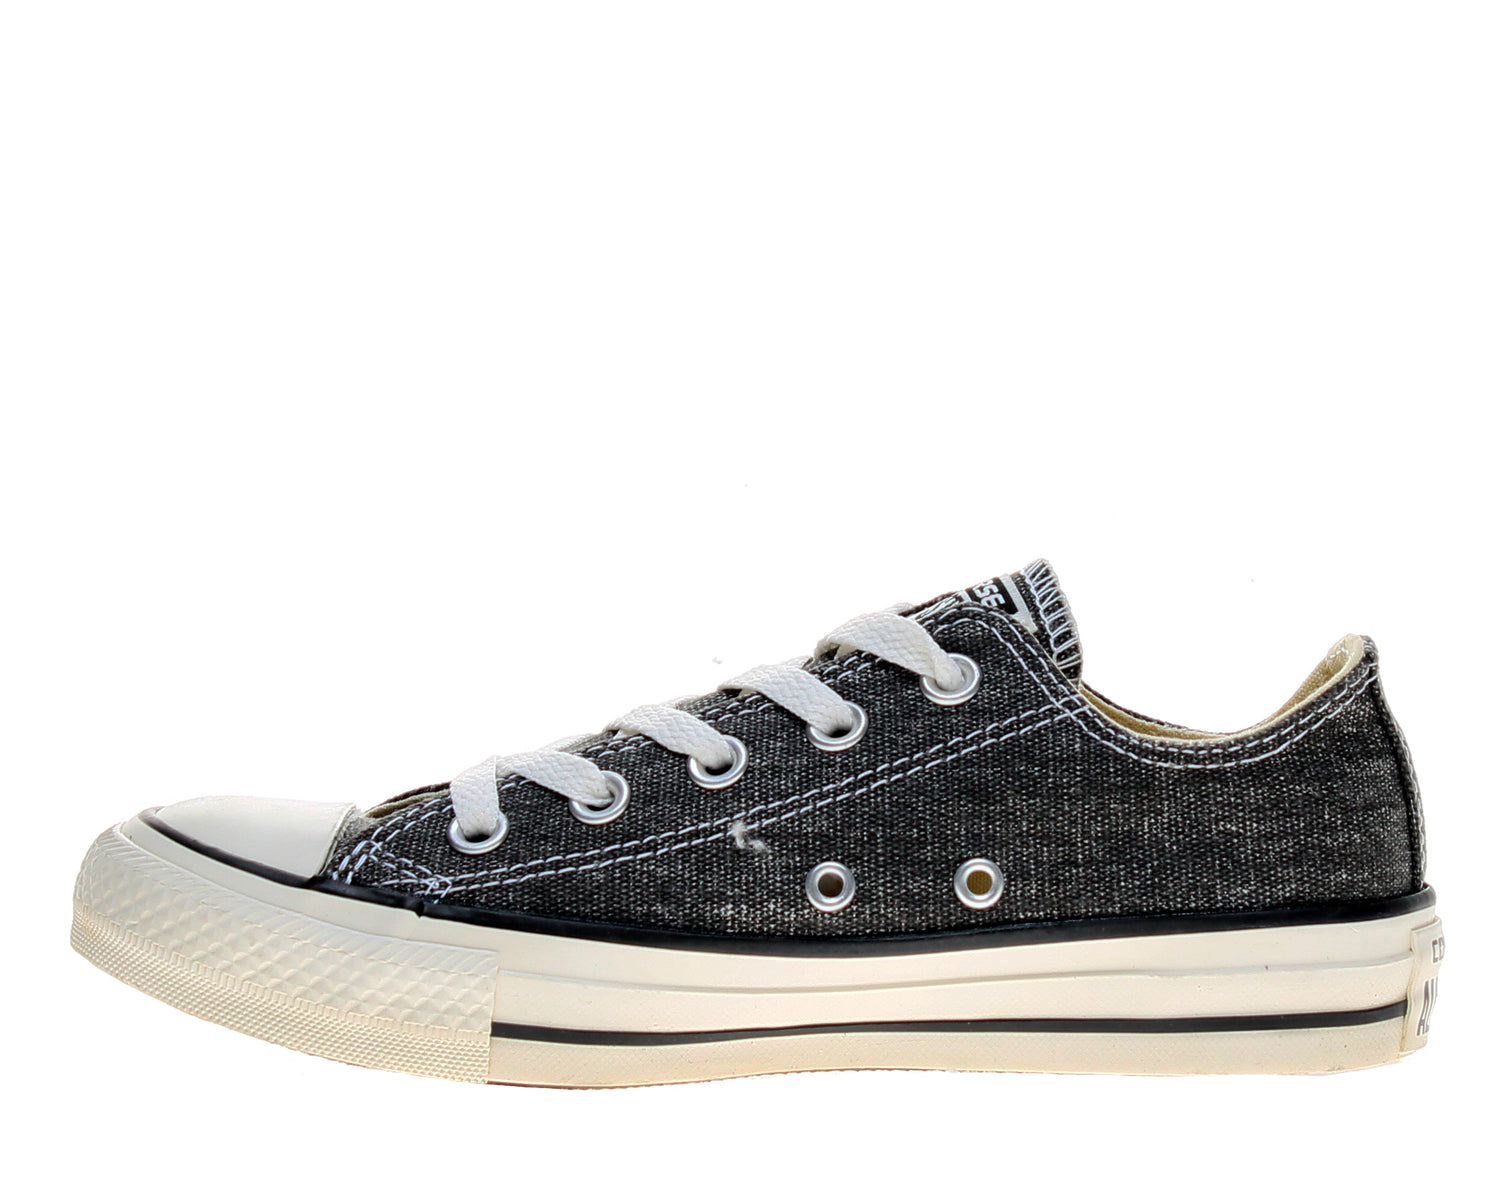 Converse Chuck Taylor All Star OX Washed Canvas Low Top Sneakers